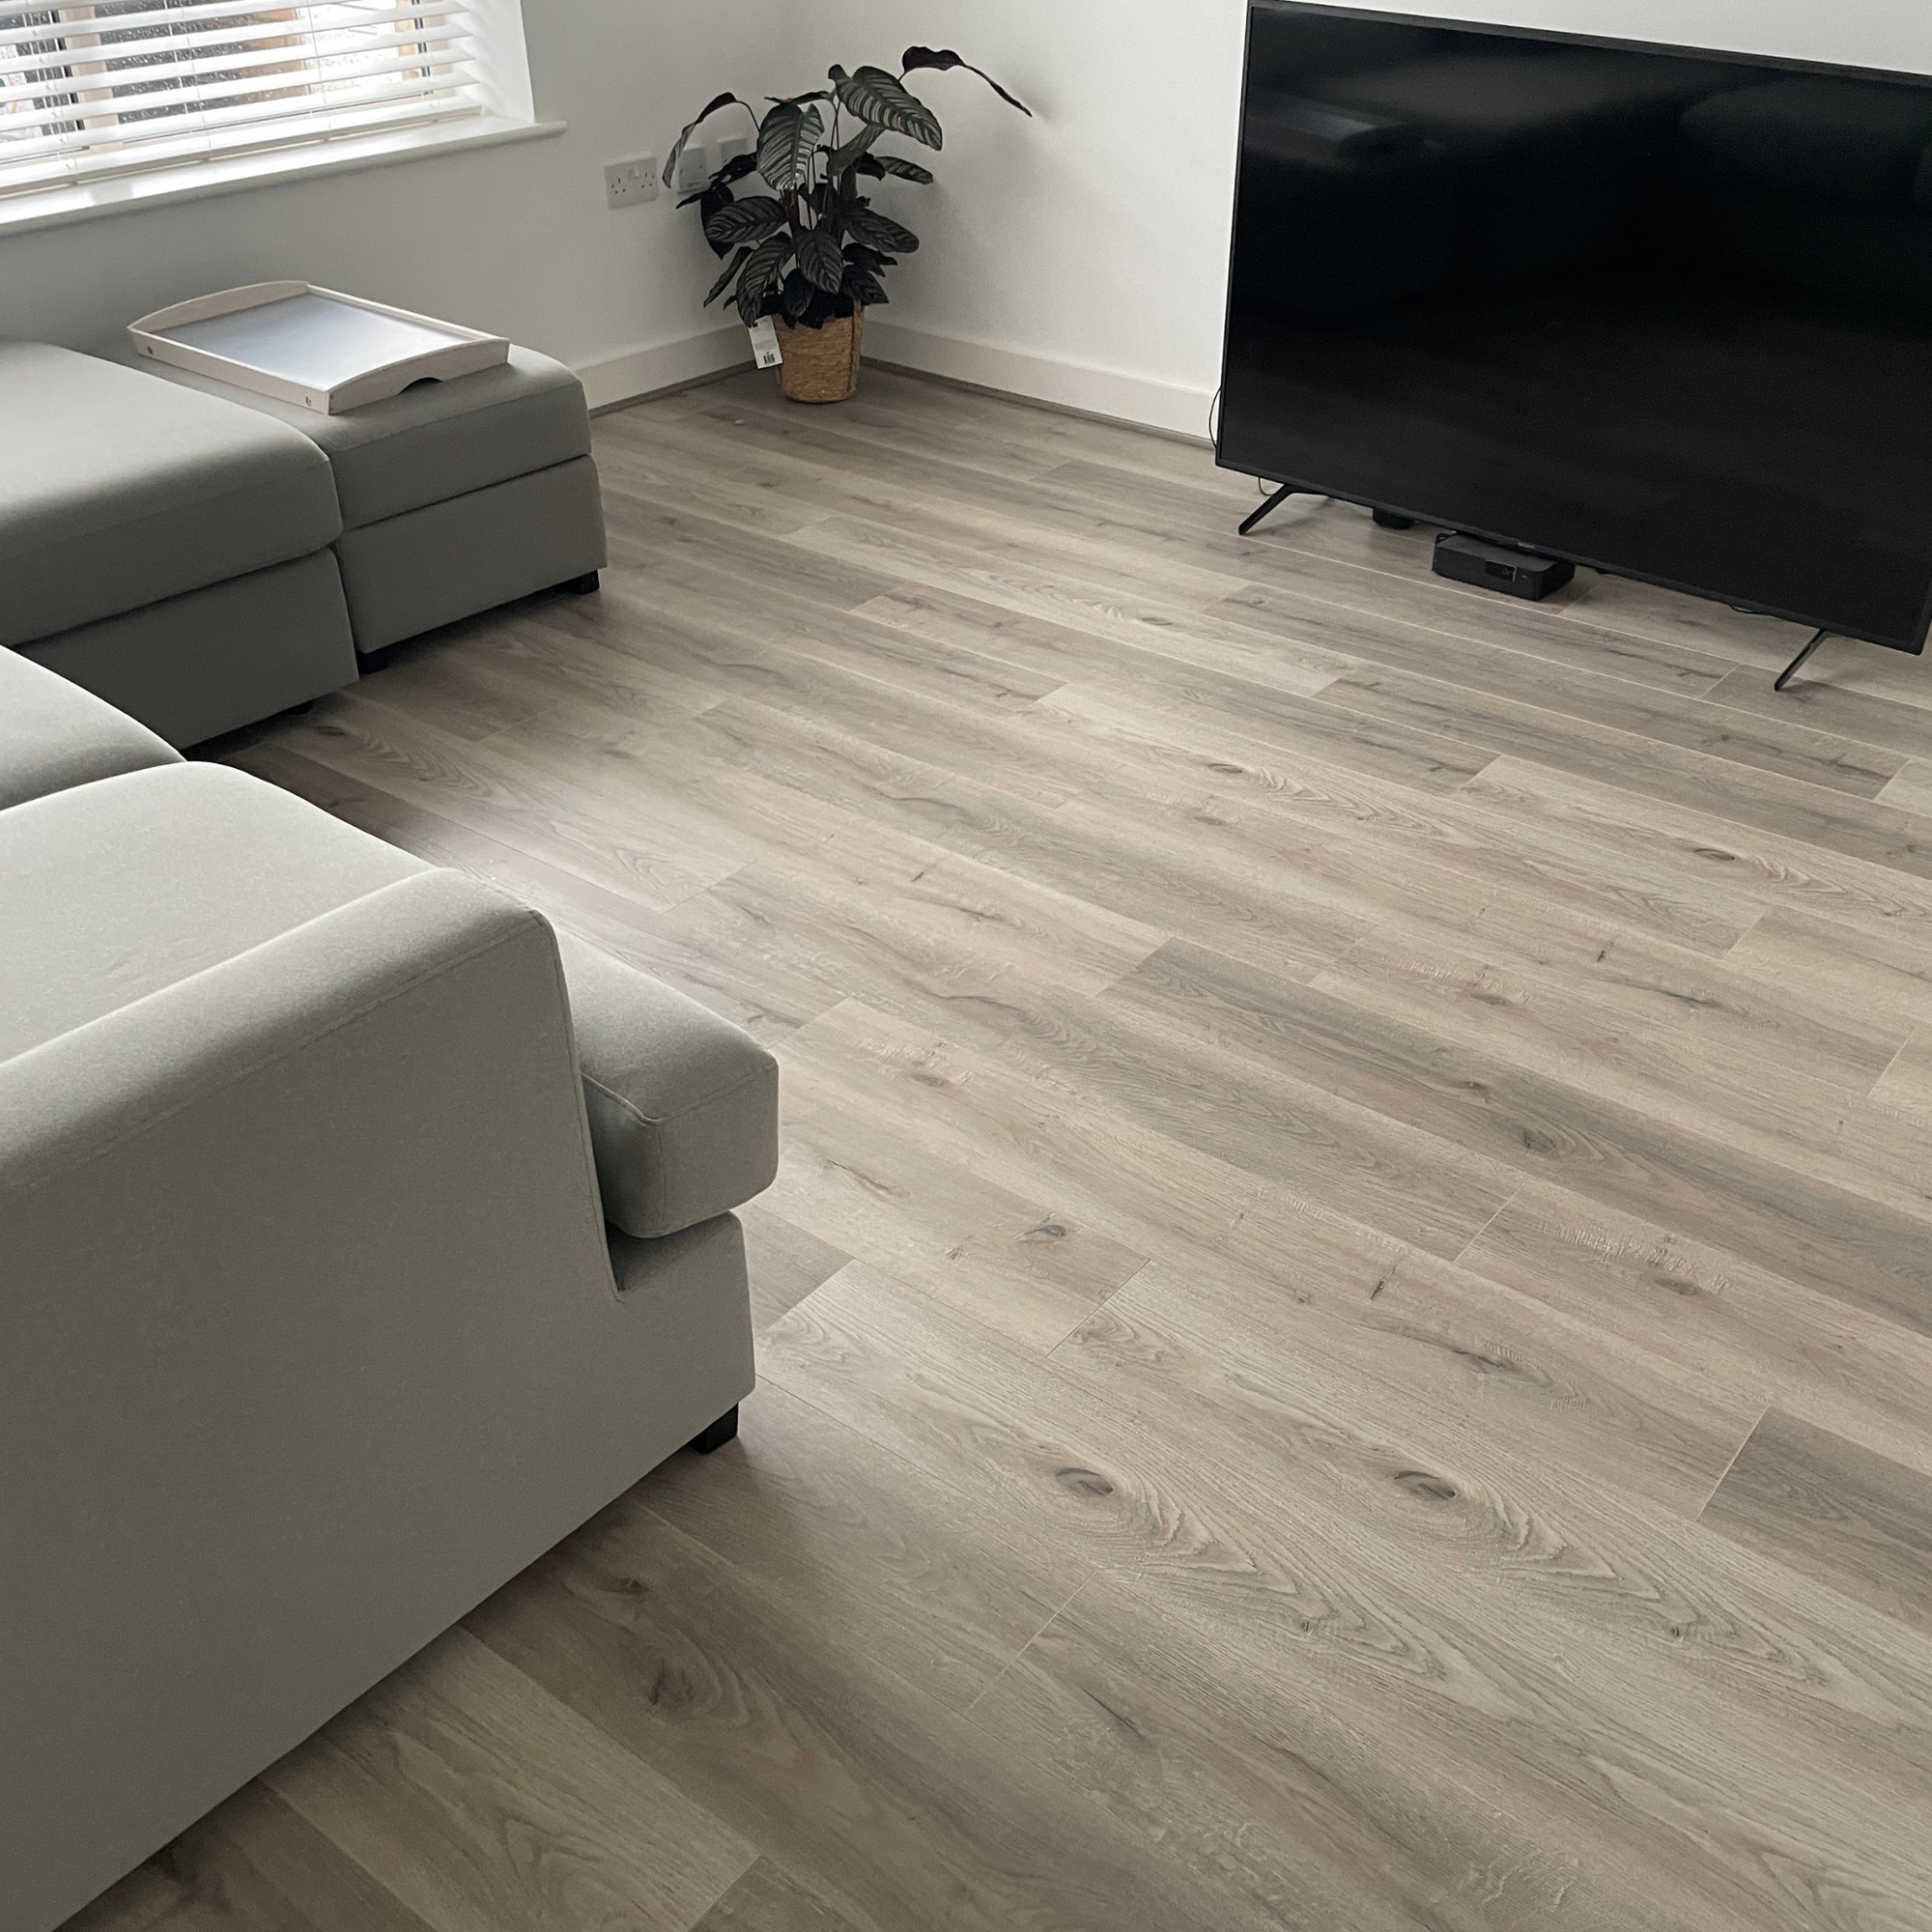 H1003 Laminate Wood Floor for sale in Nigeria | DecorCity